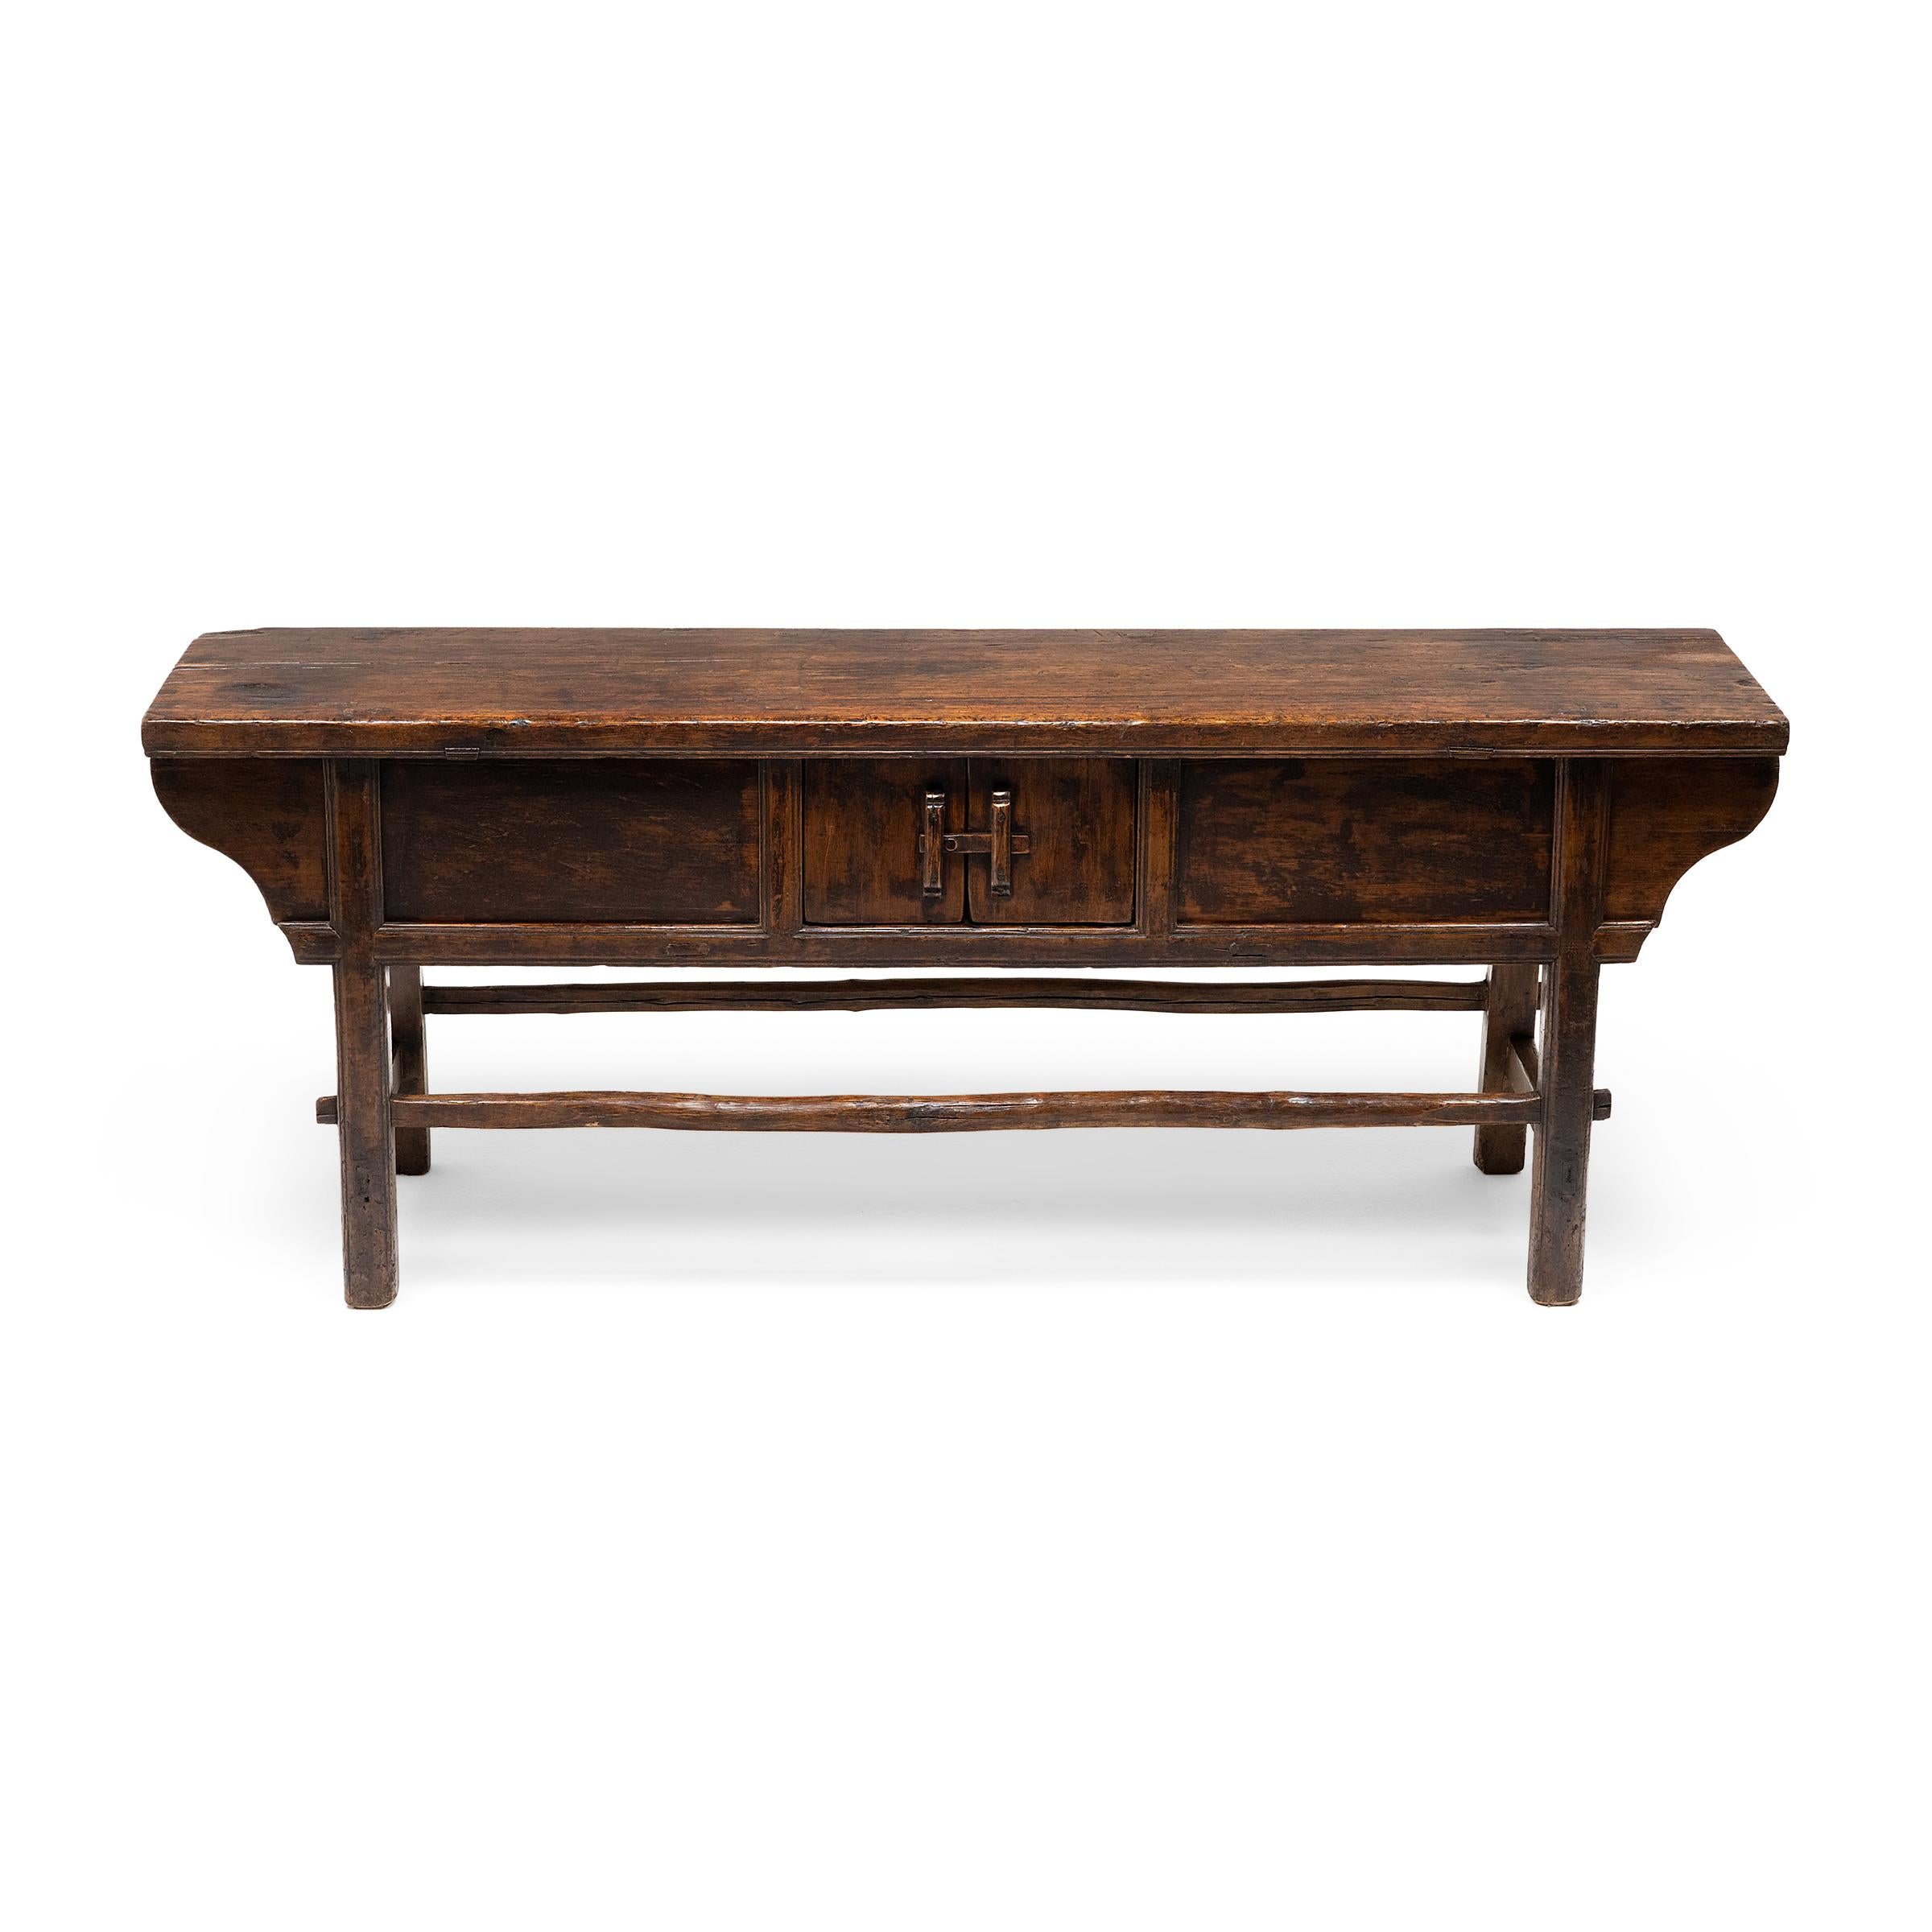 20th Century Provincial Chinese Dongbei Sideboard, c. 1900 For Sale